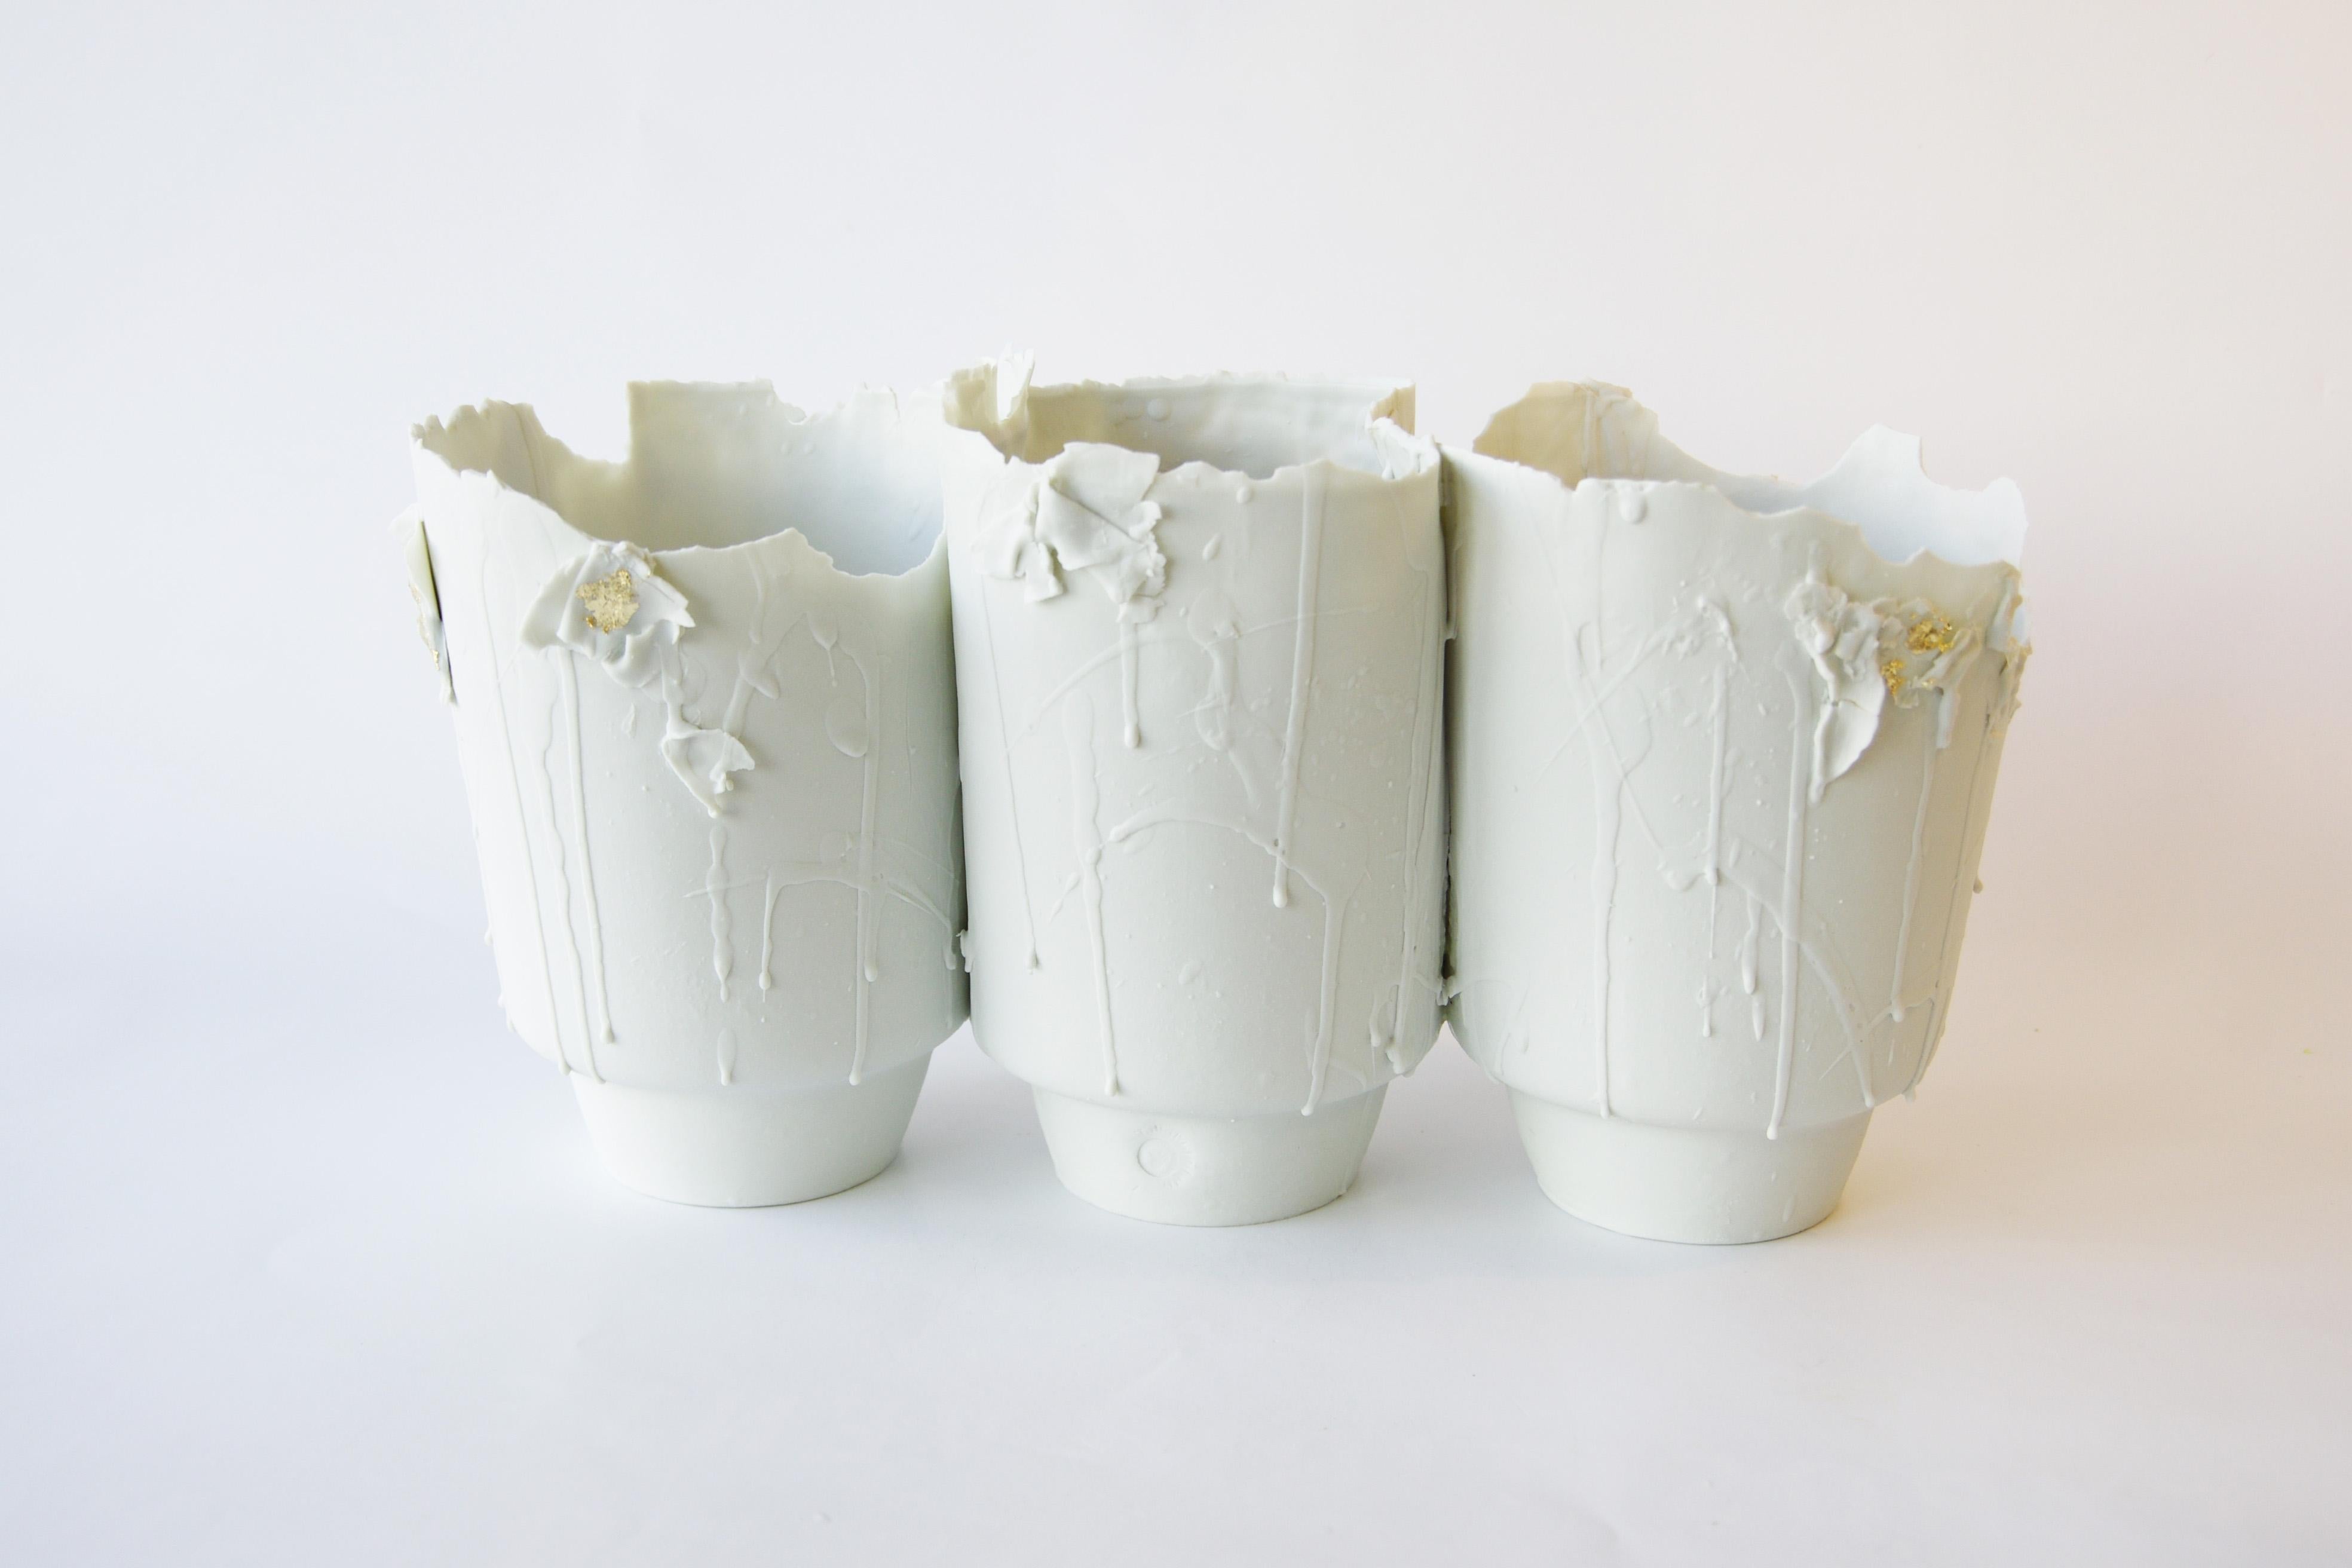 Set of 3 Porcelain Big Vases Imperfections by Dora Stanczel
One of a Kind.
Dimensions: D 13 x W 13 x H 16 cm (each).
Materials: Porcelain and gold.

I create bespoke and luxurious porcelain pieces with a careful aesthetic. Beyond the technical